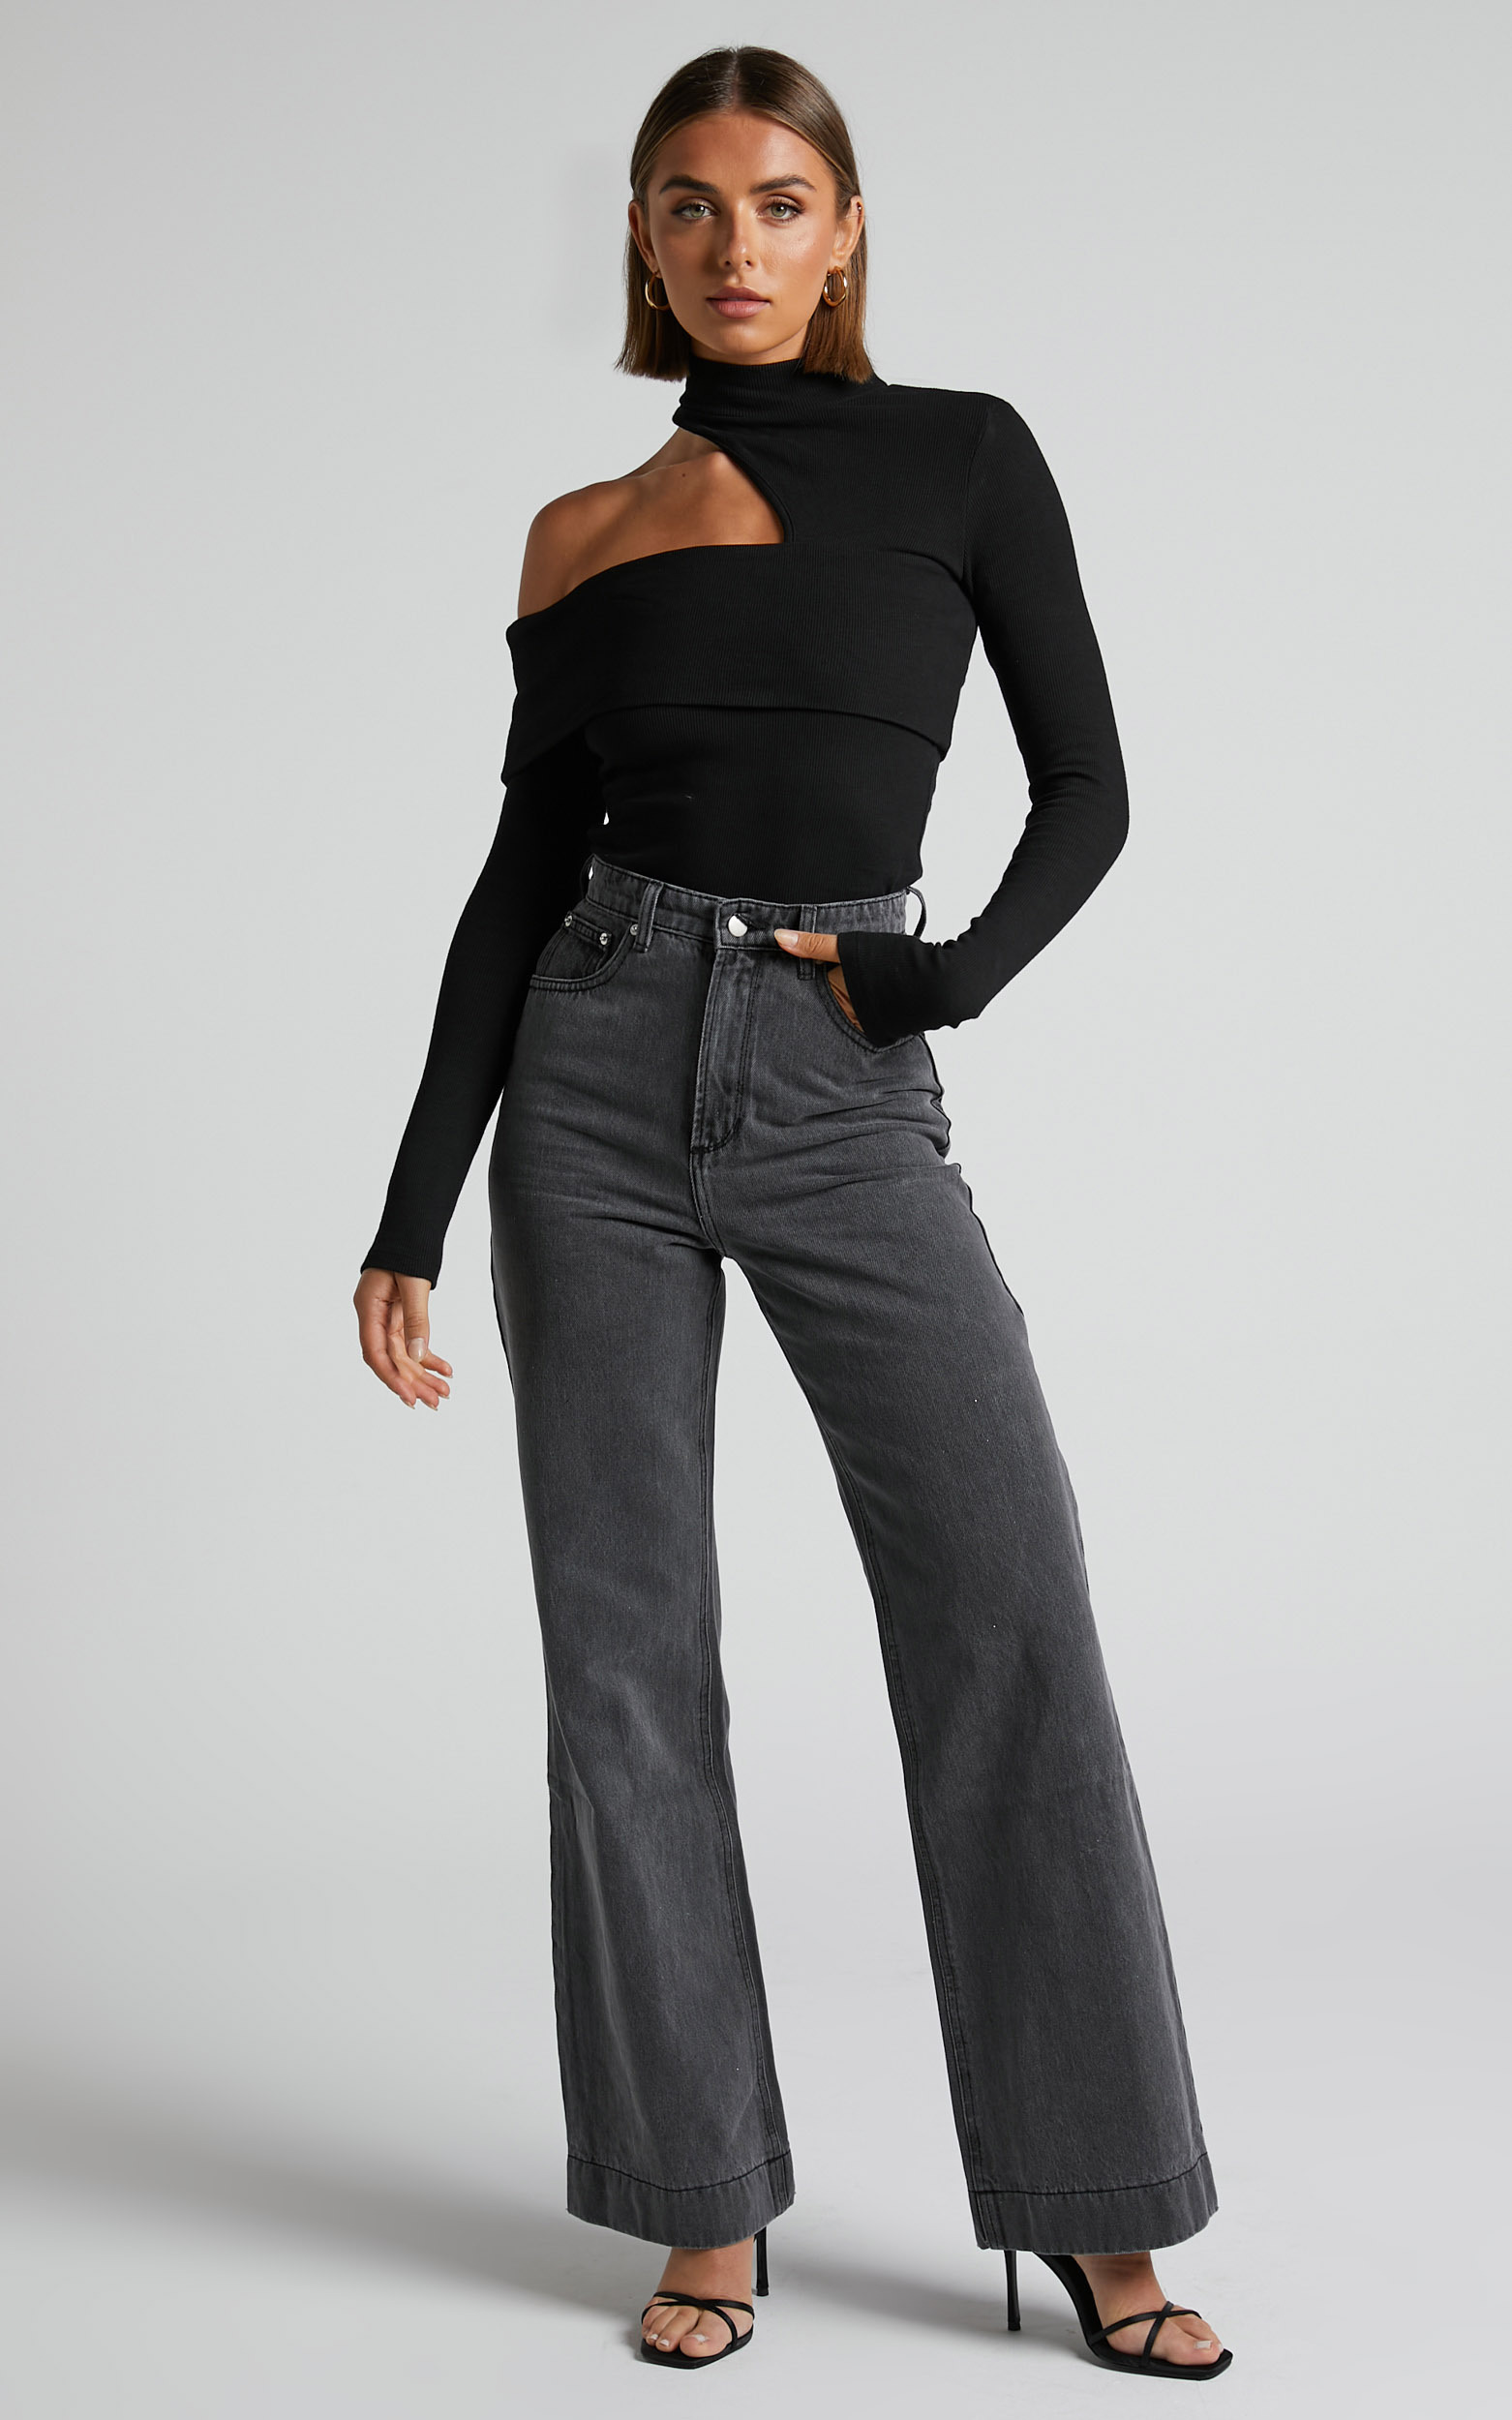 Emman High Waisted Recycled Cotton Wide Leg Jeans in Washed Black - 04, BLK1, hi-res image number null